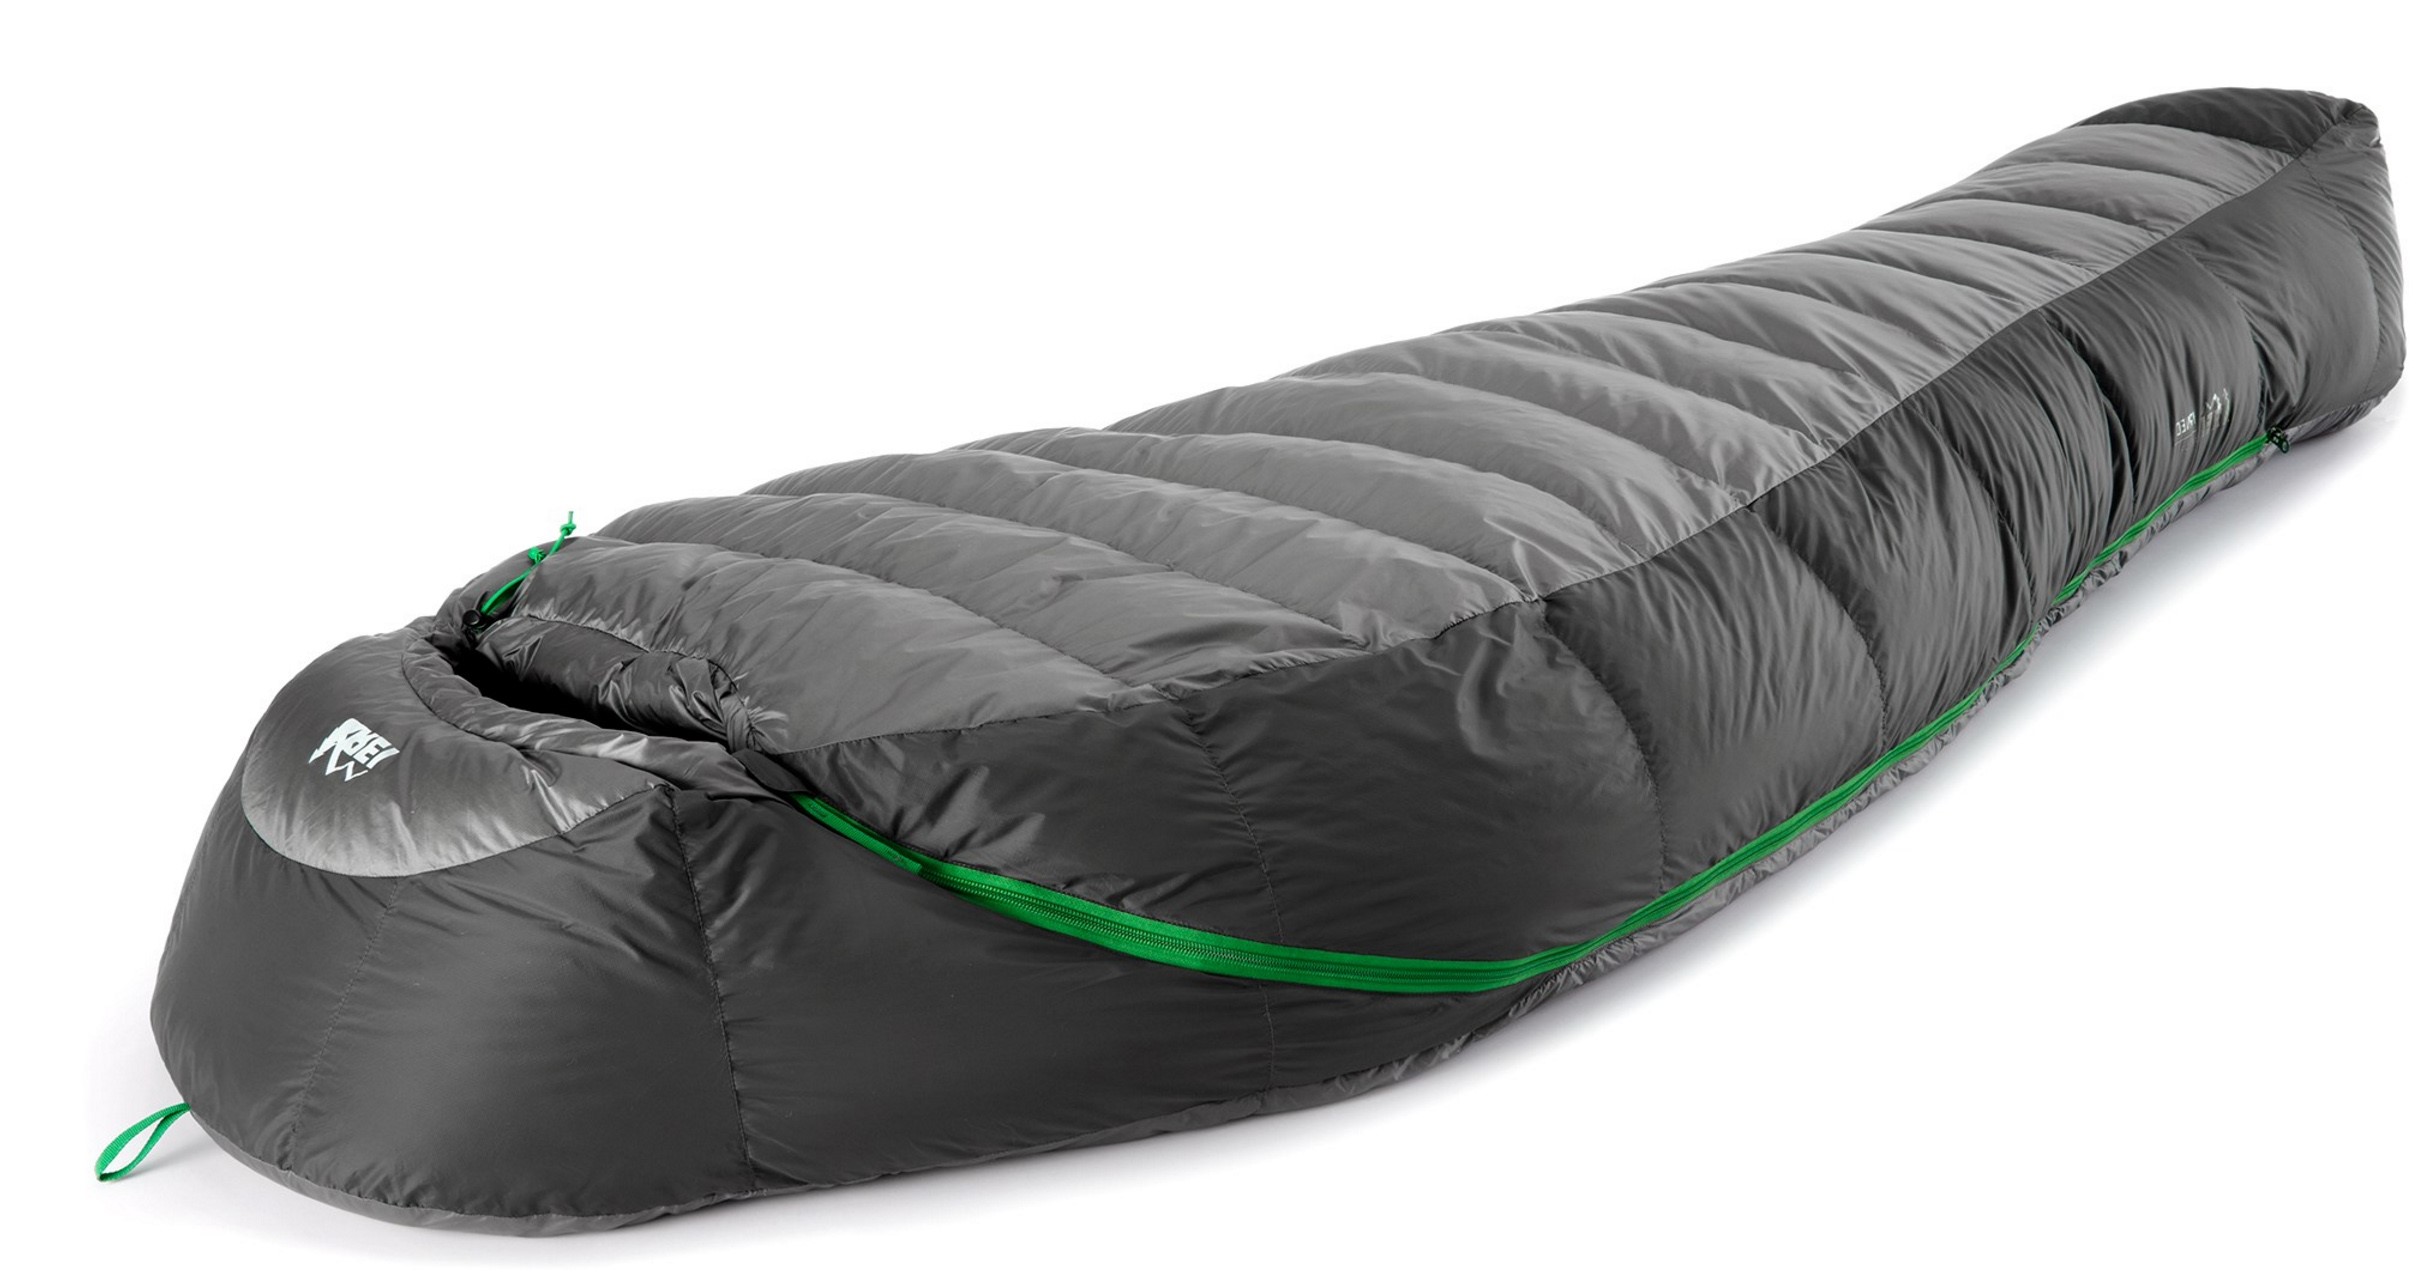 Insulated Sleeping Bag Review: Stay Warm and Cozy All Night